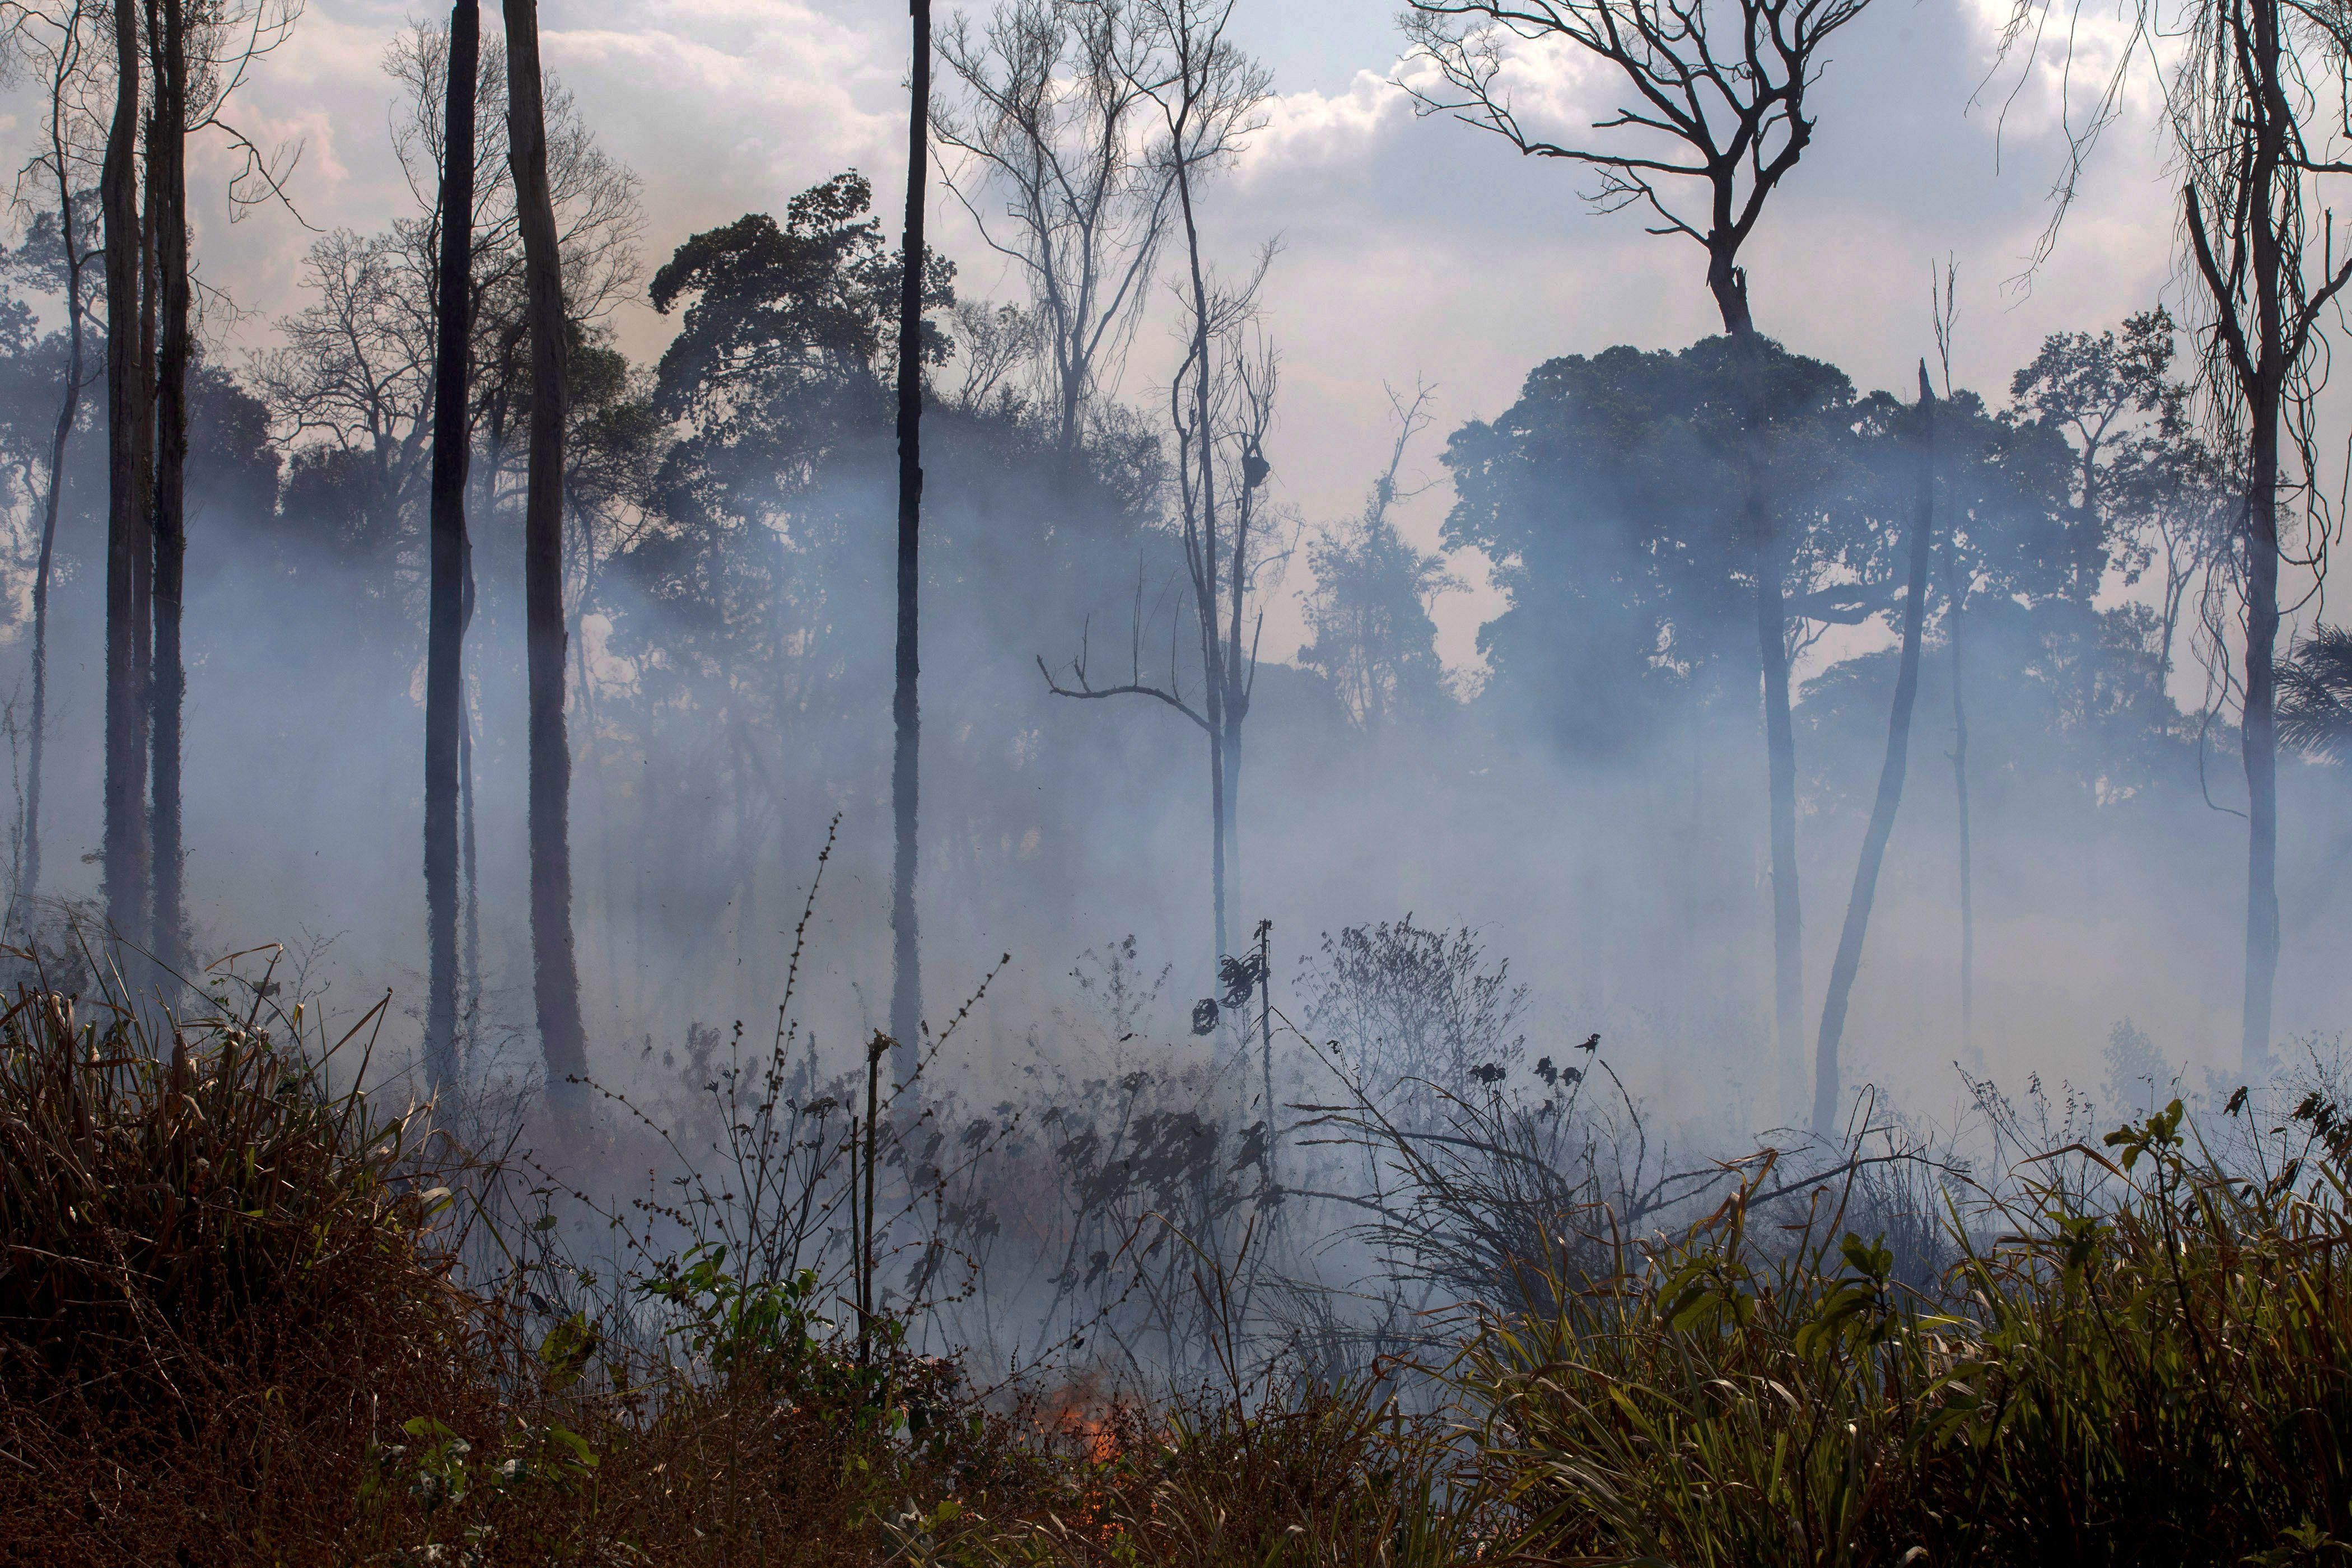 Amazon rainforest fires: How to spot inaccurate photo